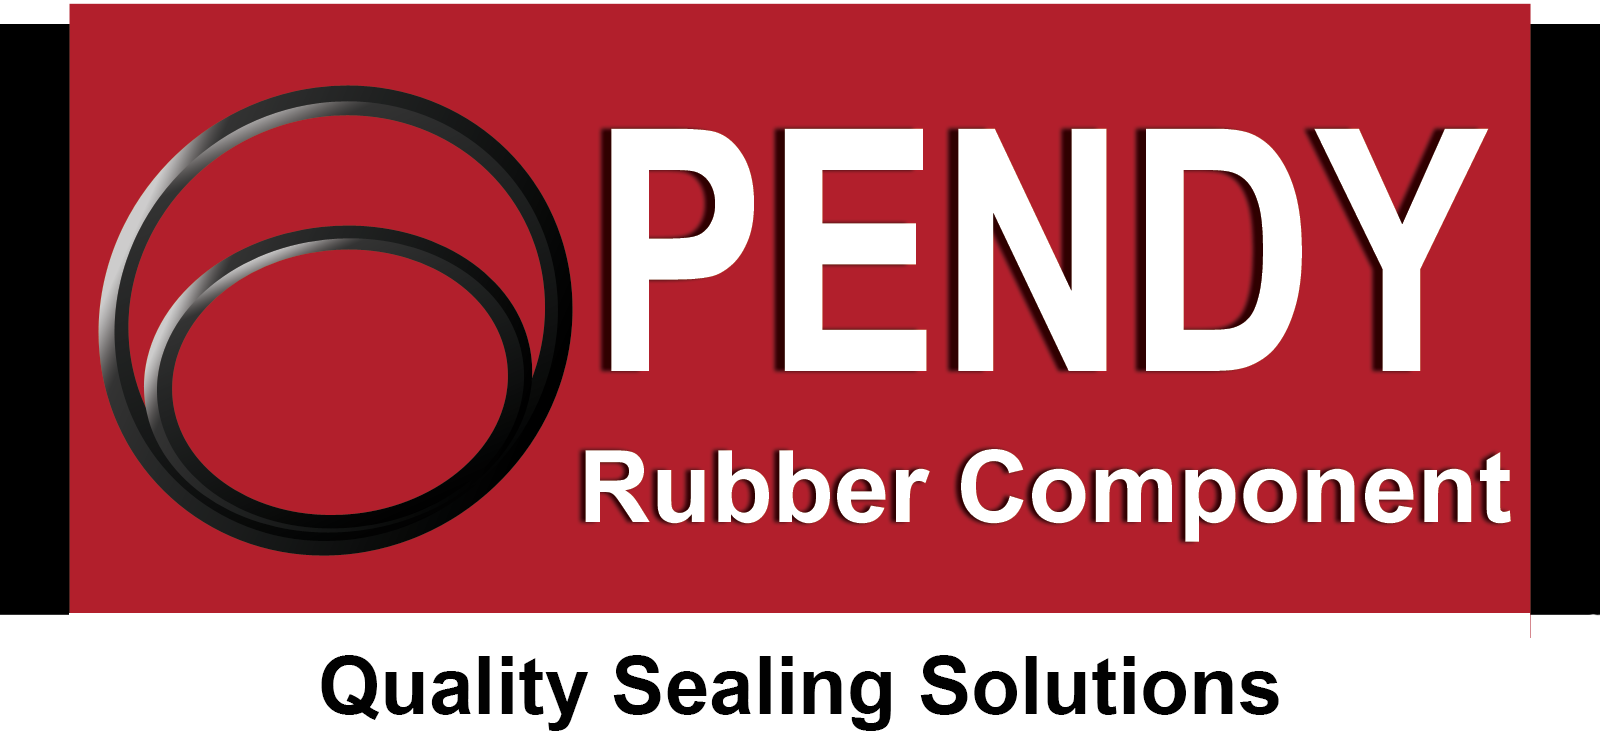 PENDY Rubber Component - Quality Sealing Solutions